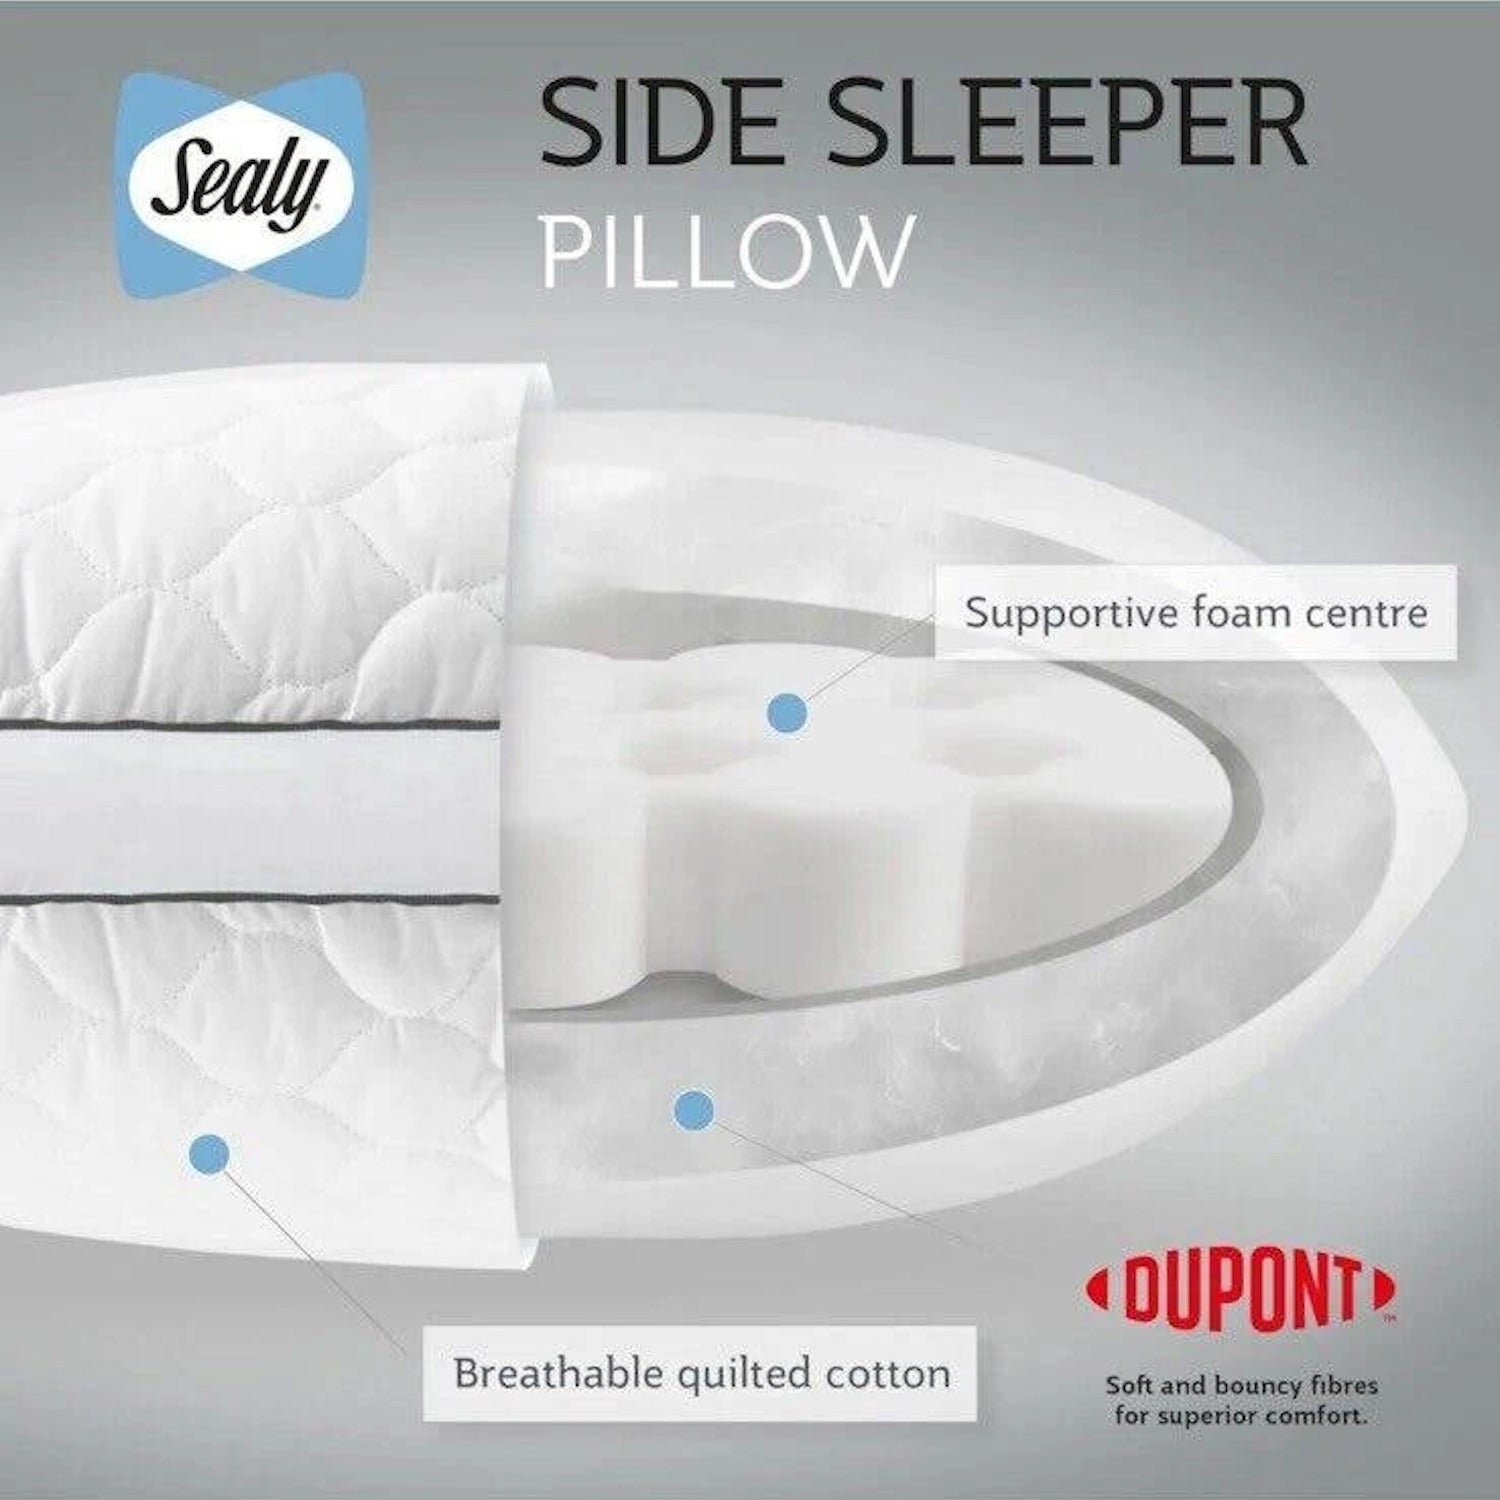 The Sealy Side Sleeper has duo filling with a supportive foam centre wrapped in a breathable quilted cotton for the ultimate comfort and support 